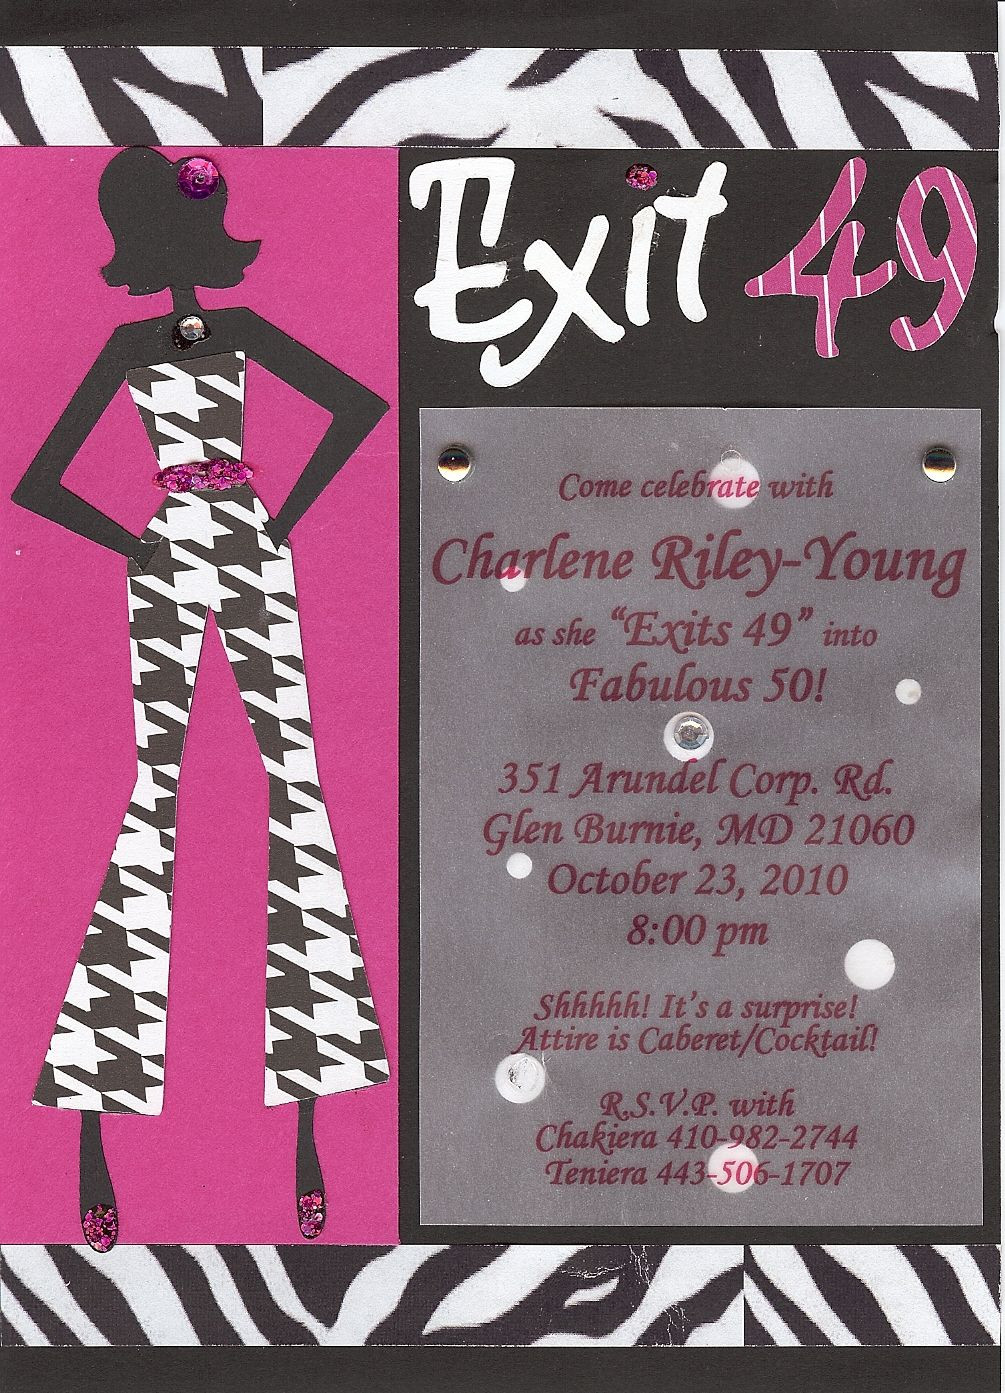 50th Birthday Party Invitations Ideas
 50th Birthday Party Invite for a fiesty Lady